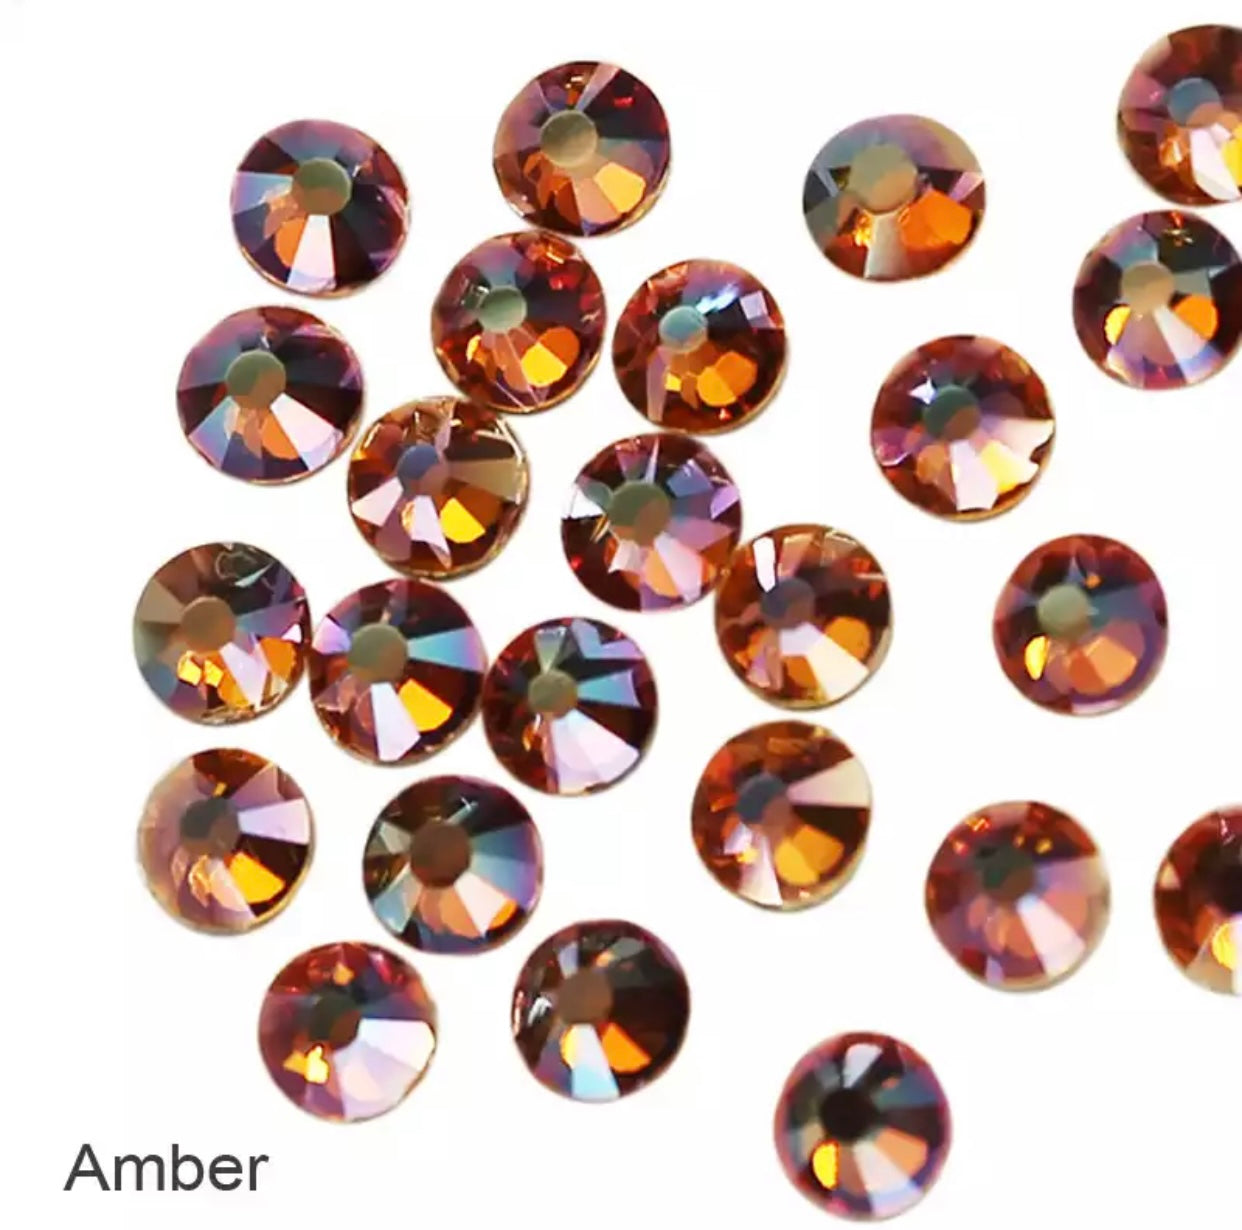 Highest Quality Crystals - Amber - Mixed Sizes (SS3-SS20)